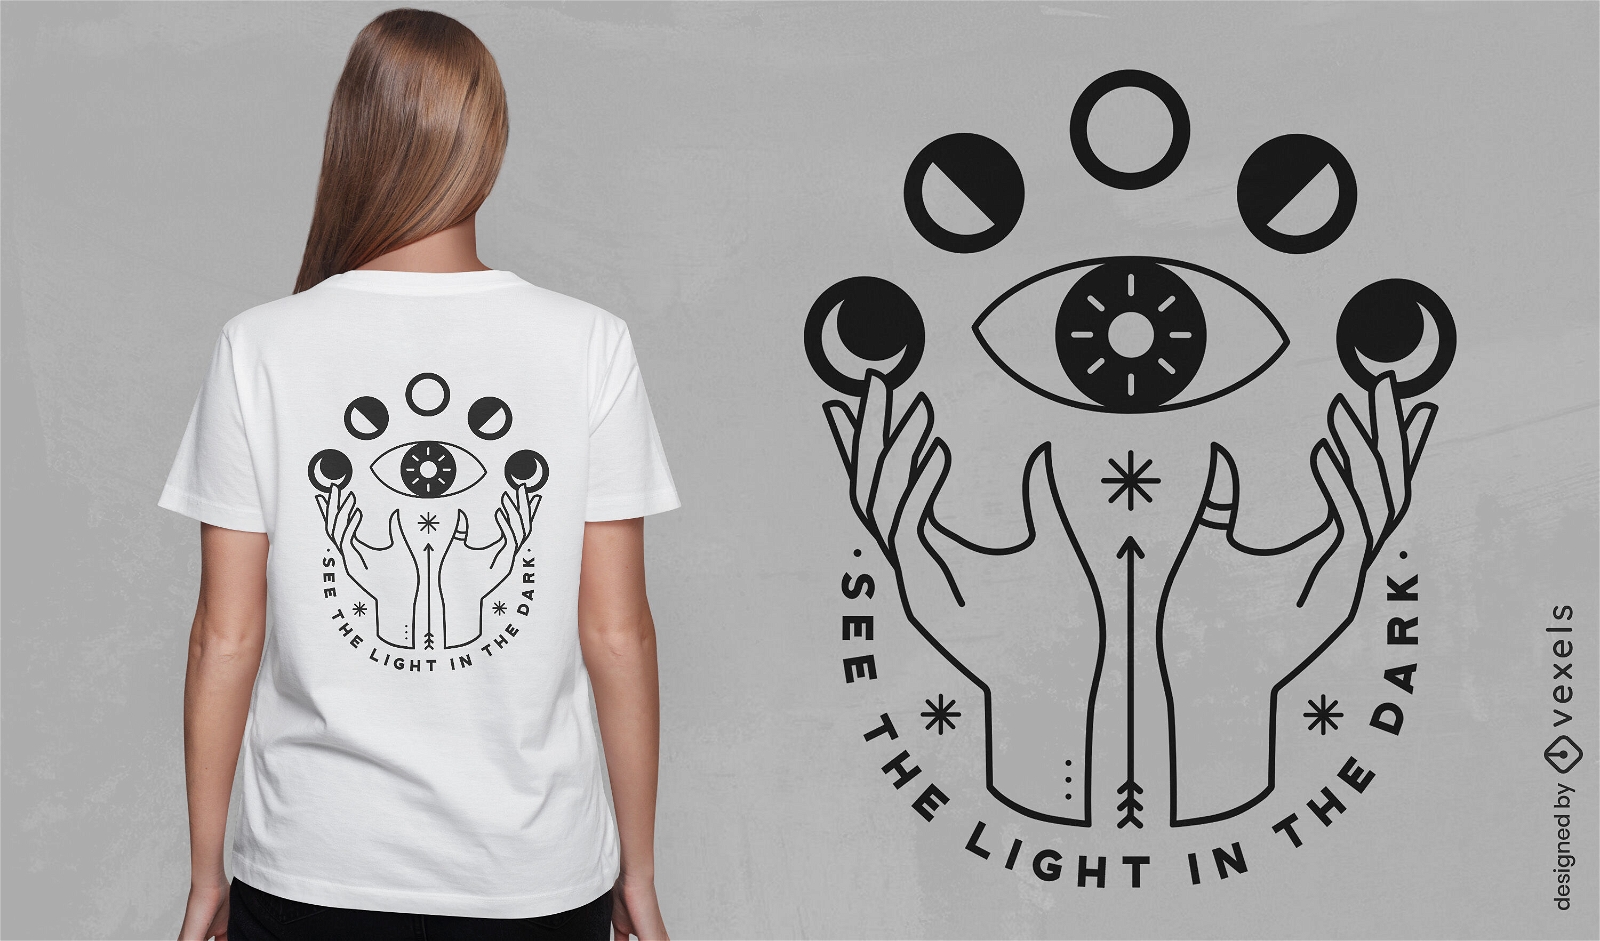 See the light in the dark esoteric t-shirt design